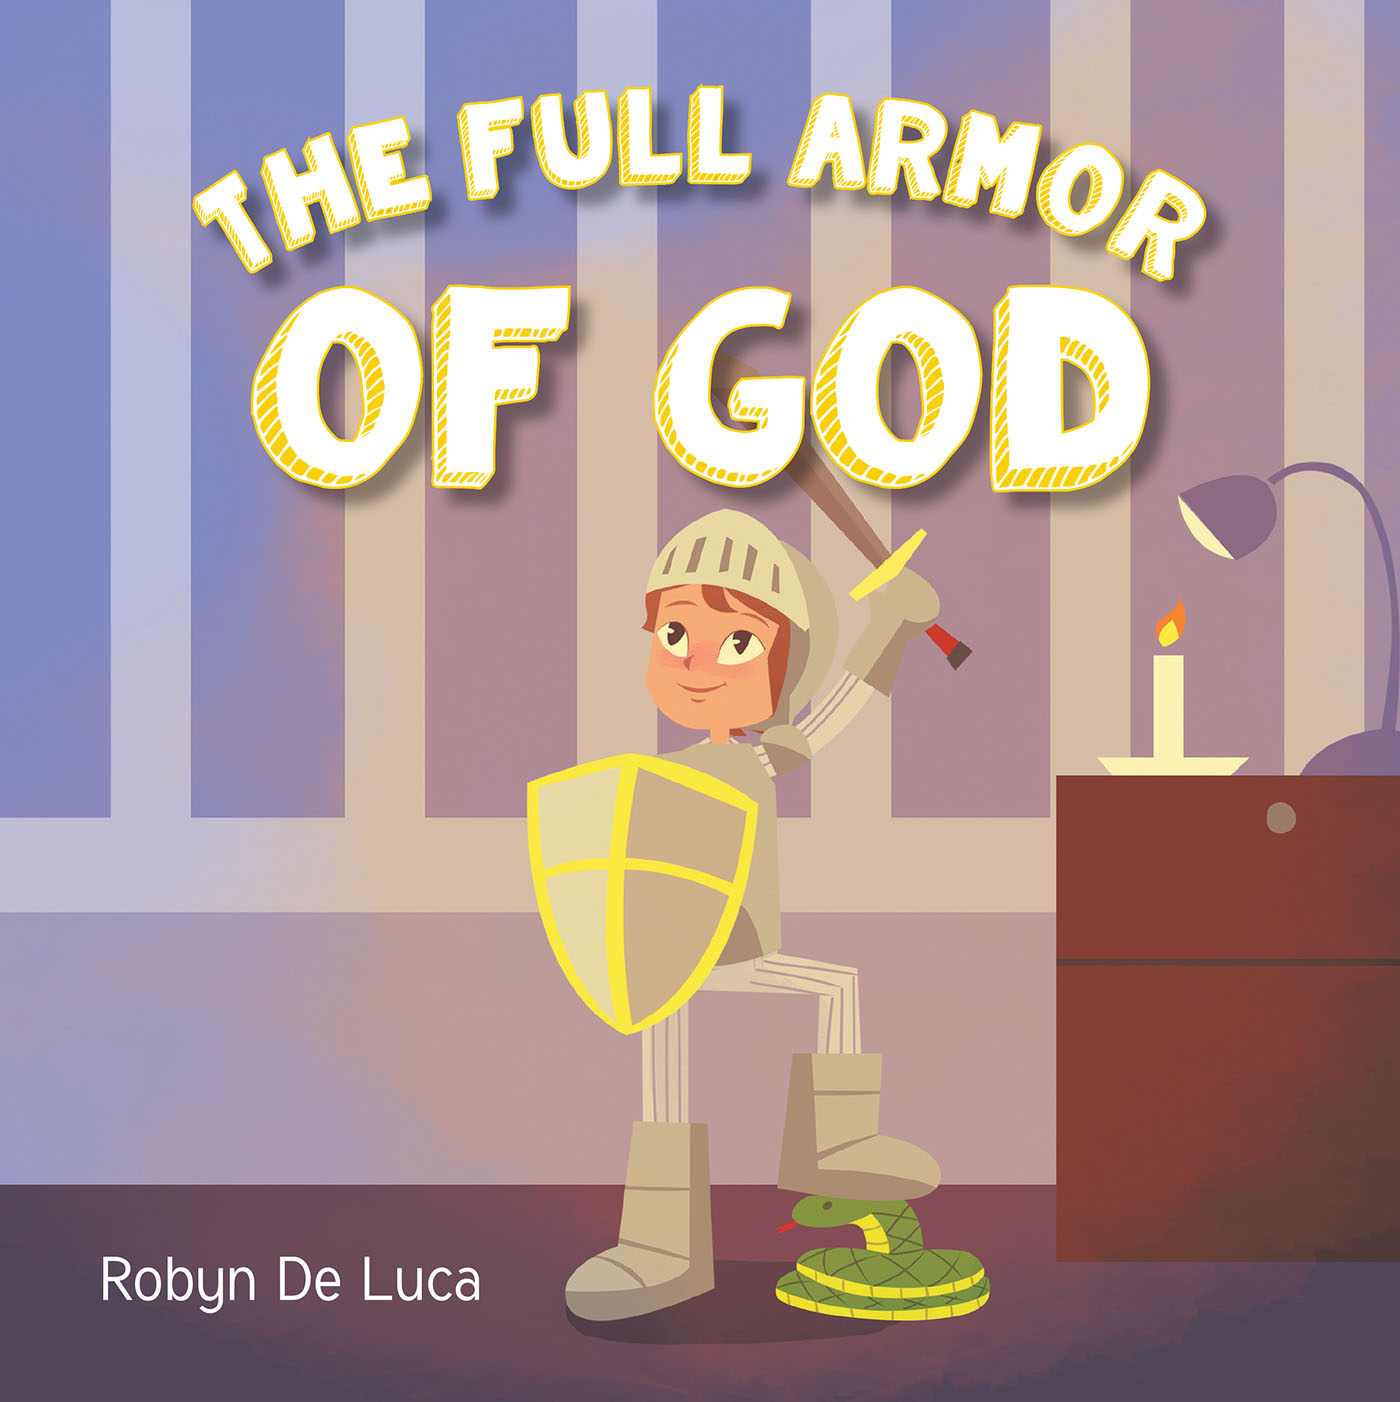 Robyn De Luca’s Newly Released "The Full Armor of God" is a Heartwarming Message of God’s Protection for Young Readers